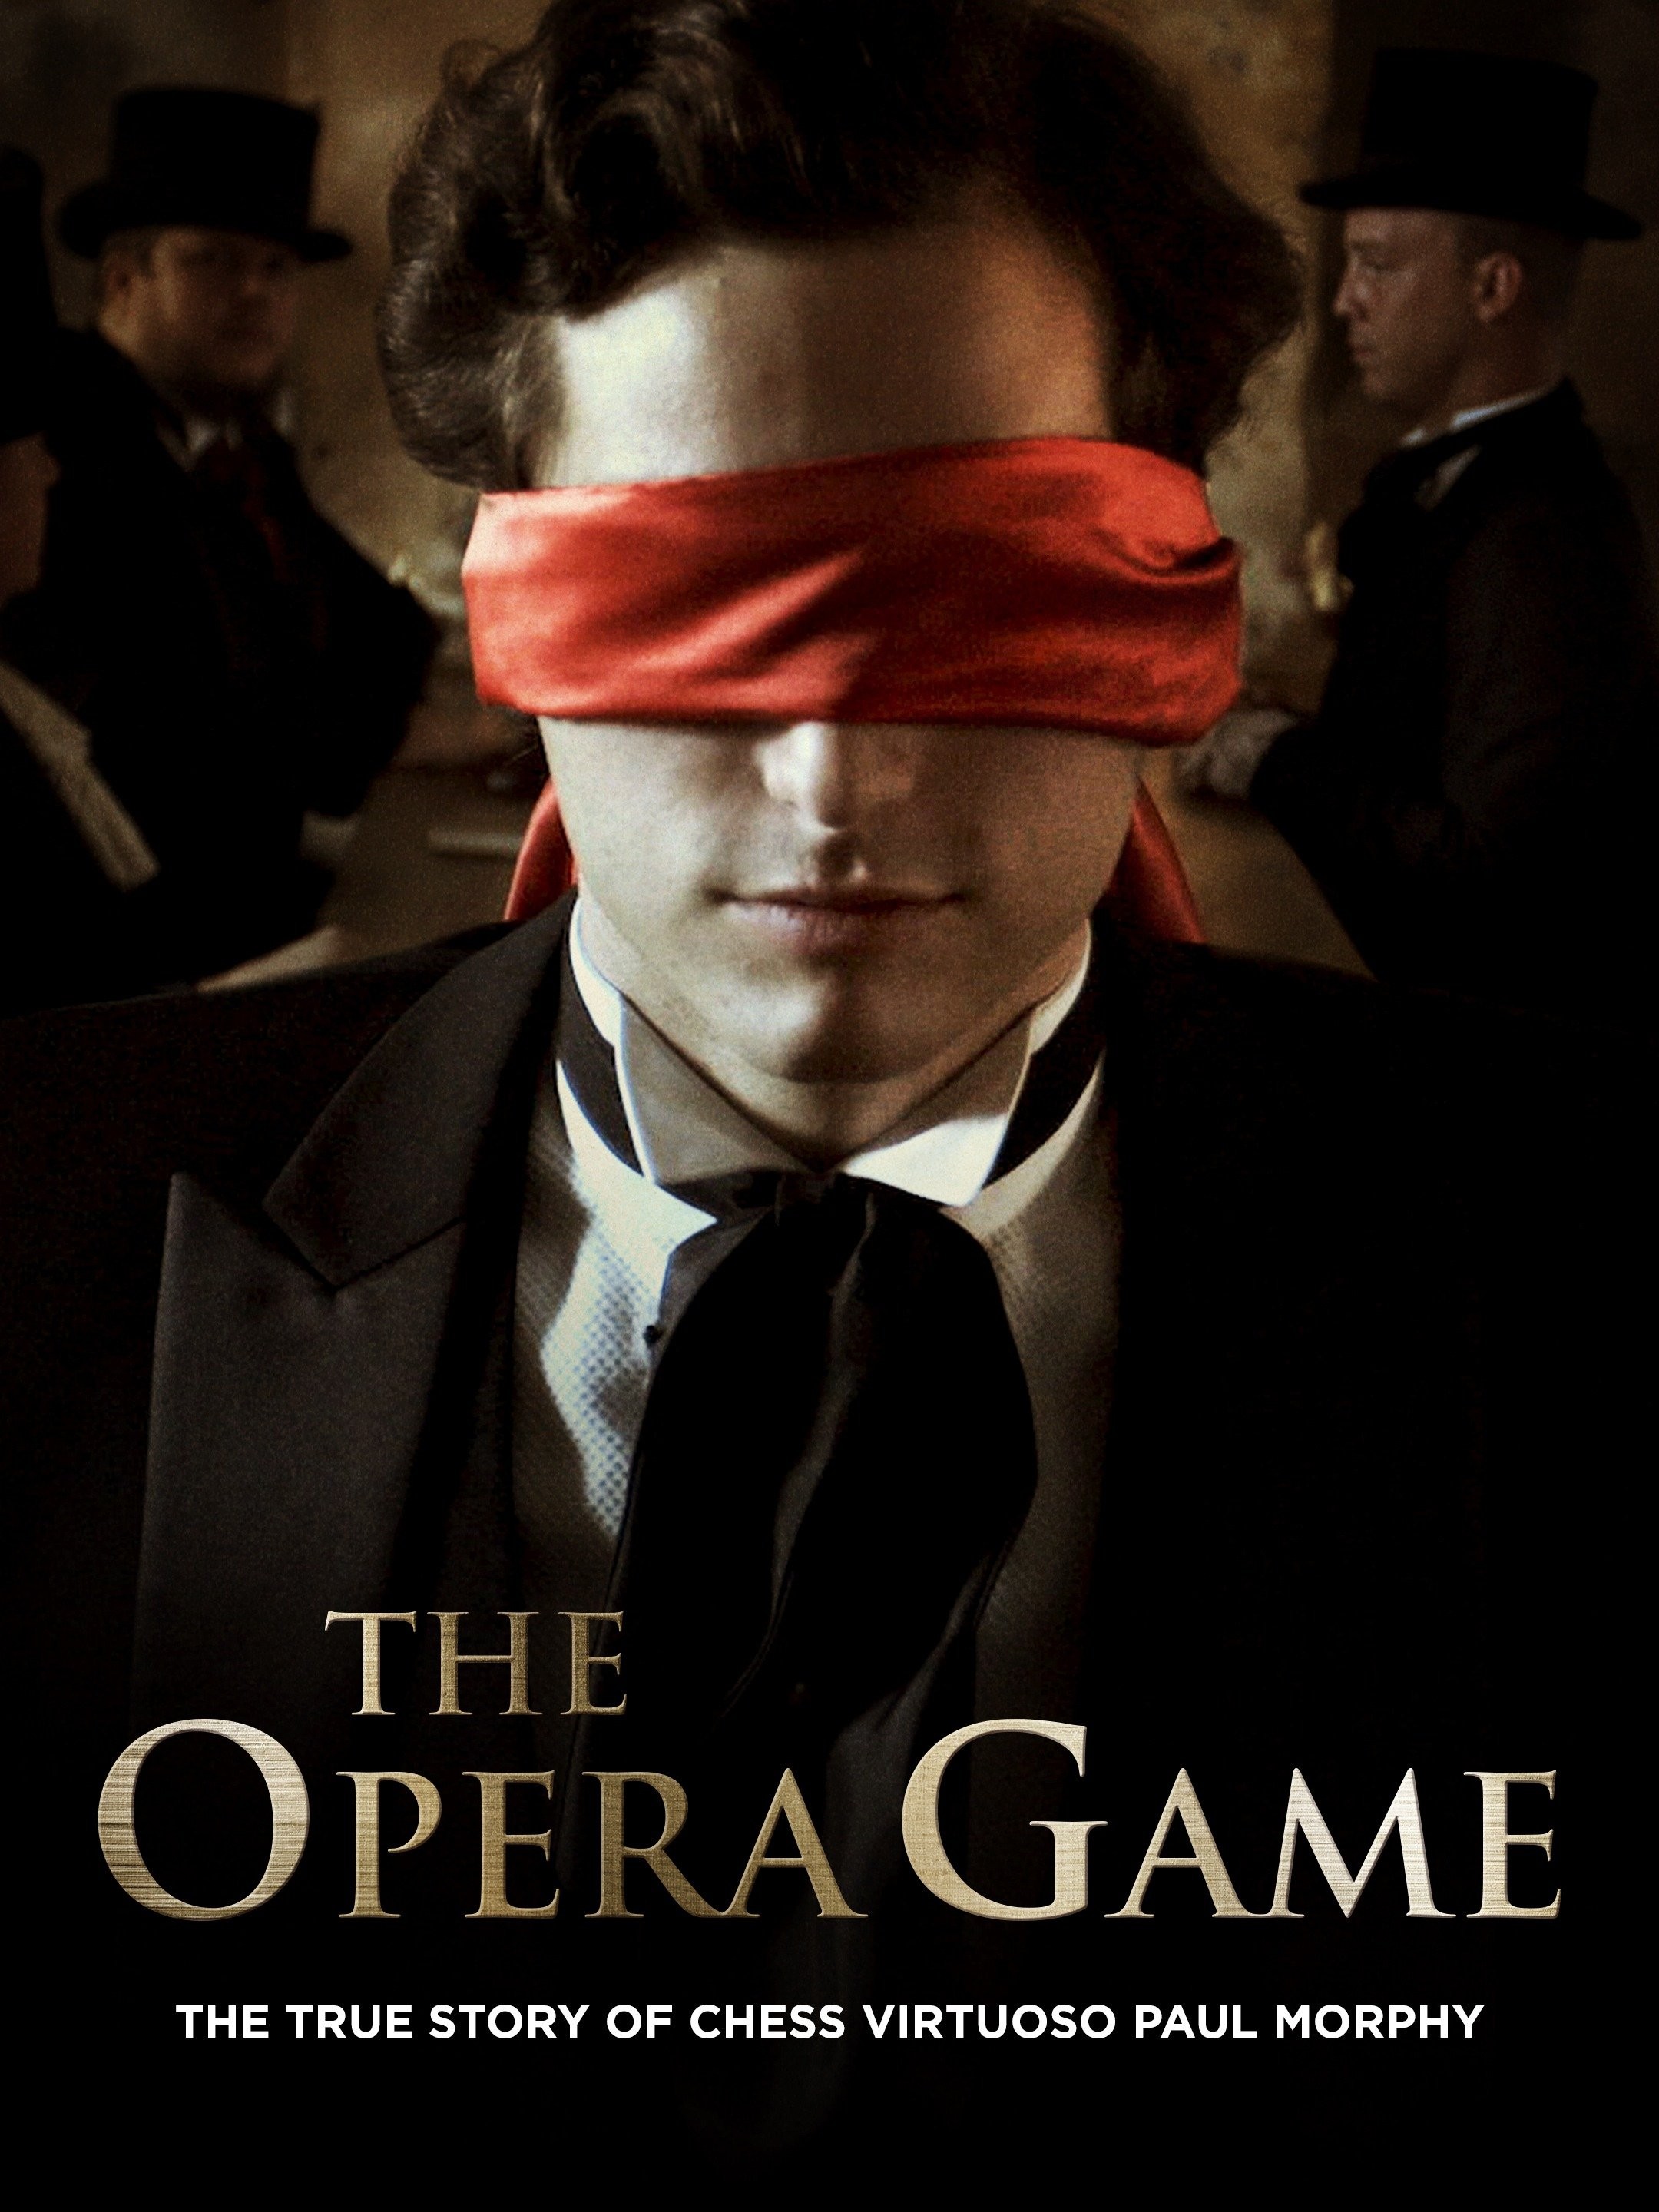 The Opera Game - Rotten Tomatoes